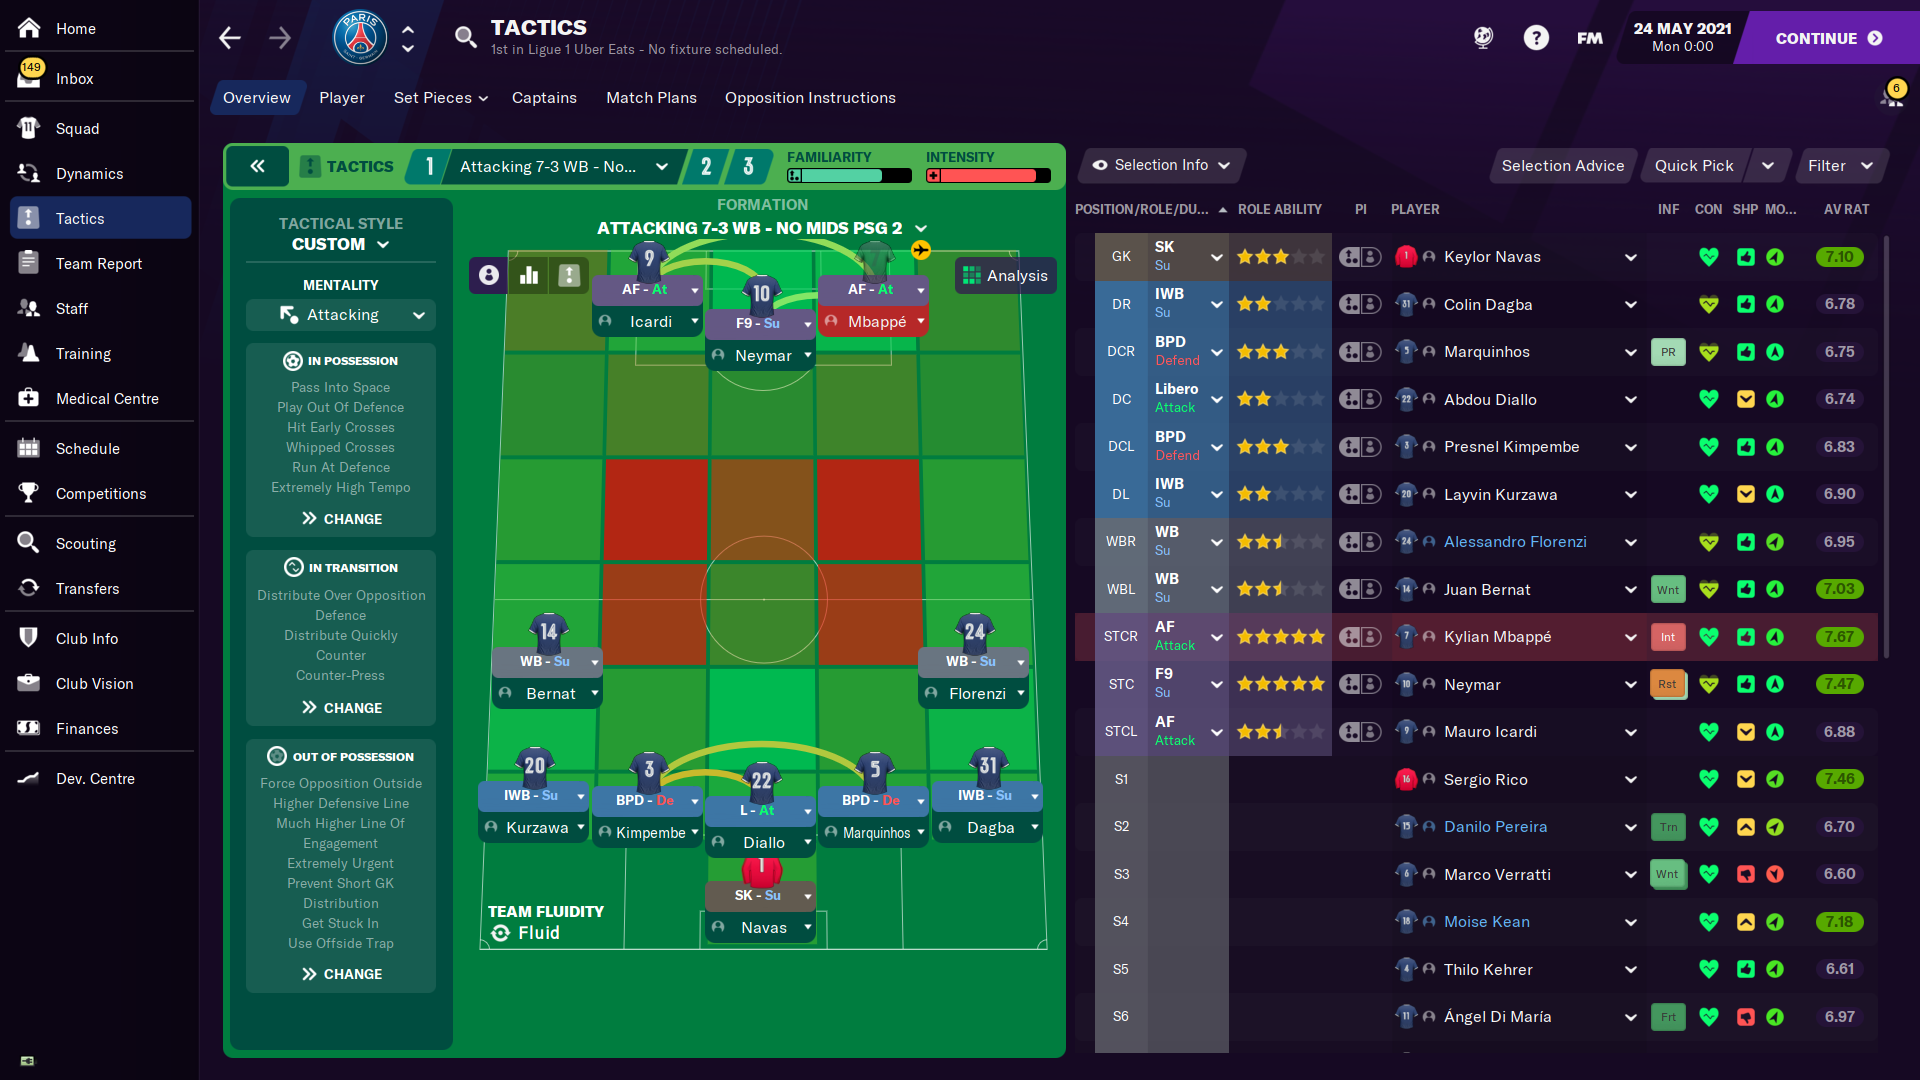 Football manager 2005 patch 5.0.2